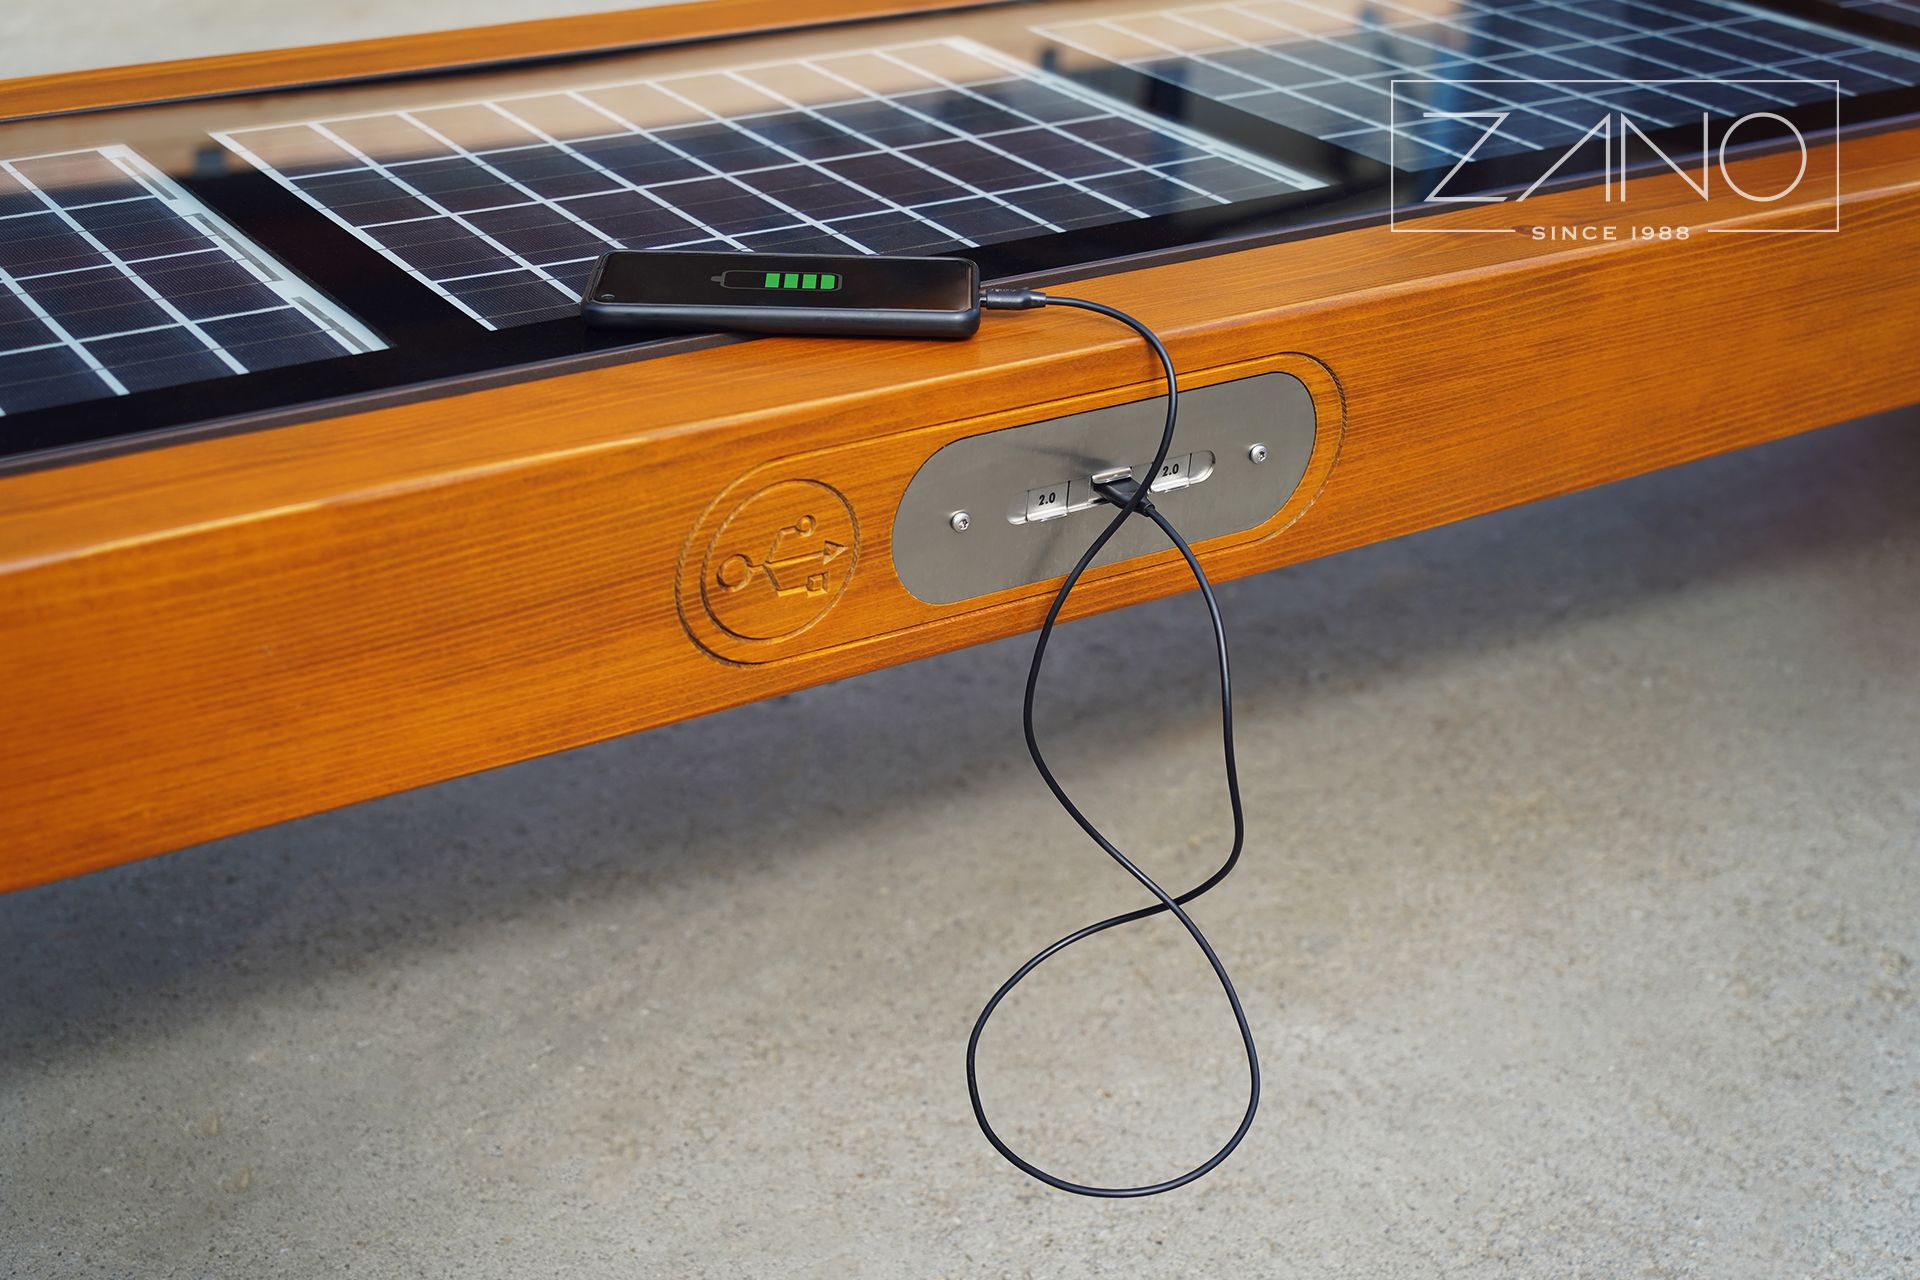 Multimedia city bench with USB and photovoltaic panels